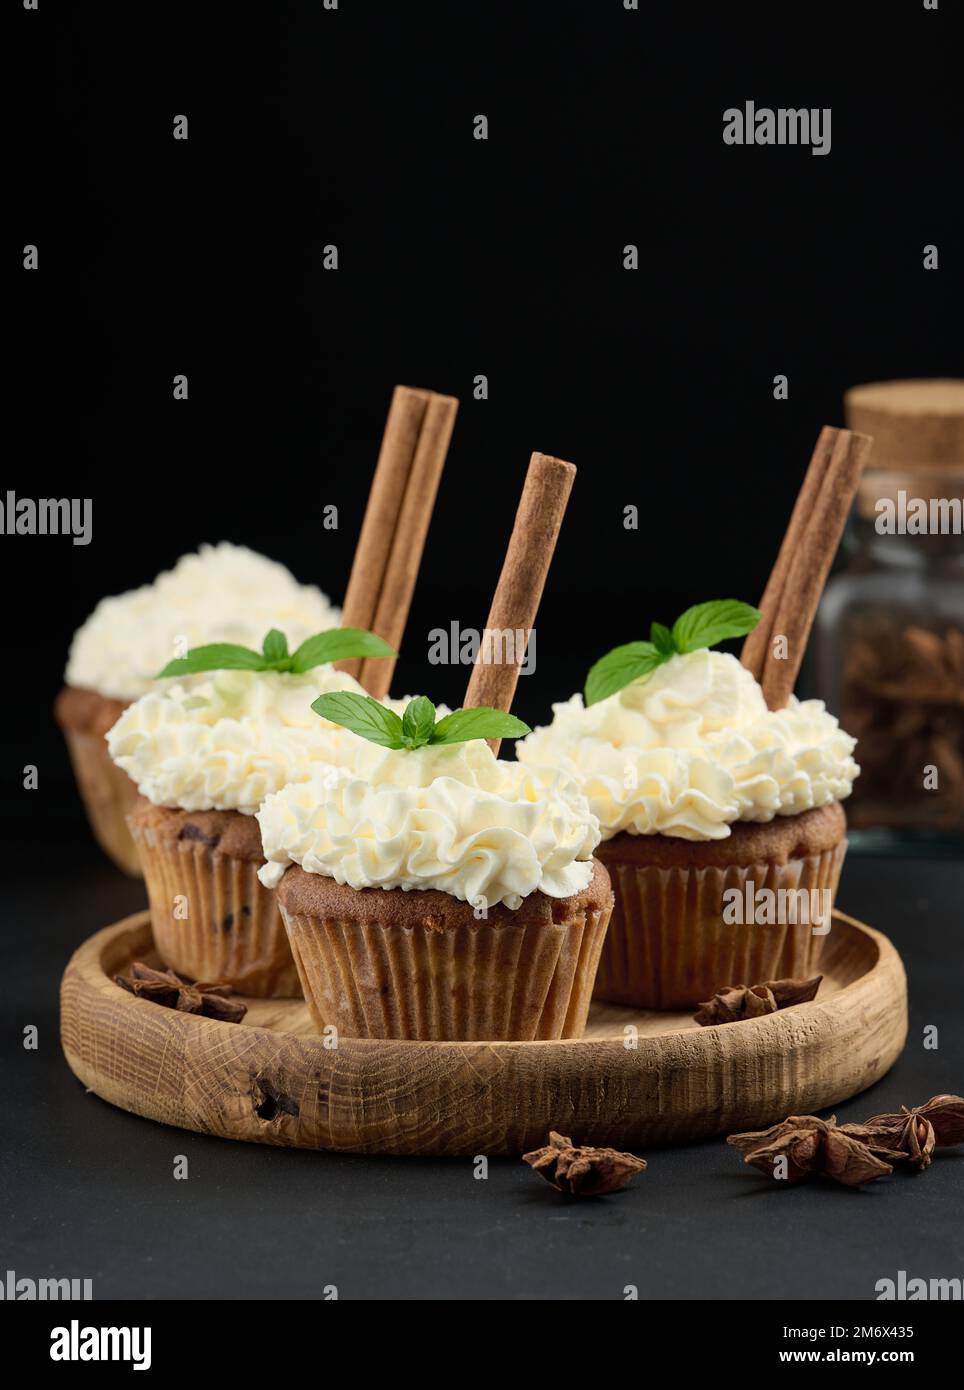 Baked cupcakes with white butter cream on the table, delicious dessert Stock Photo